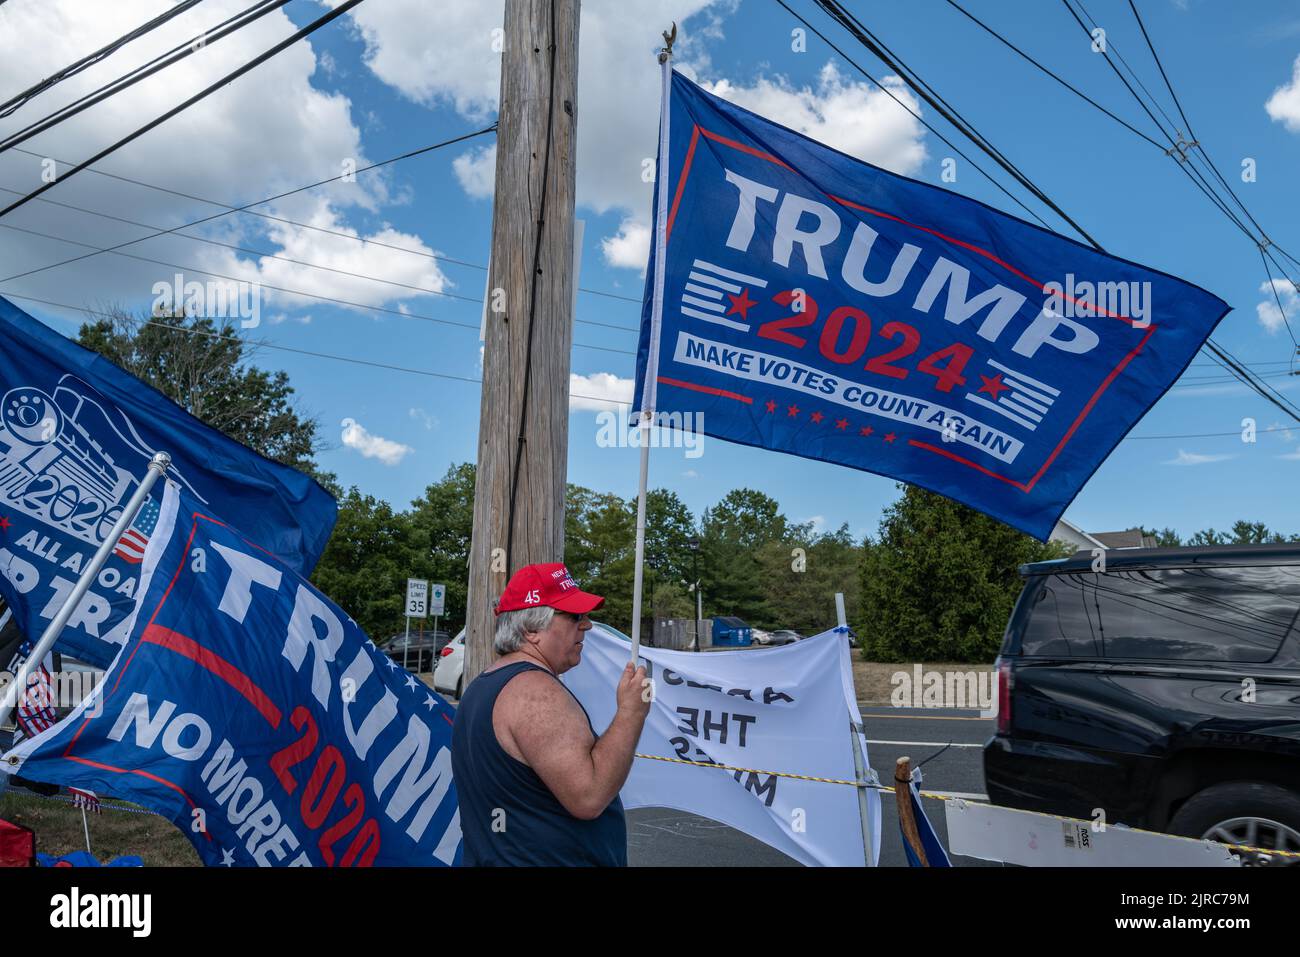 BEDMINSTER, N.J. – August 14, 2022: A demonstrator is seen during a ‘Stand with Trump’ event near the Trump National Golf Club Bedminster. Stock Photo